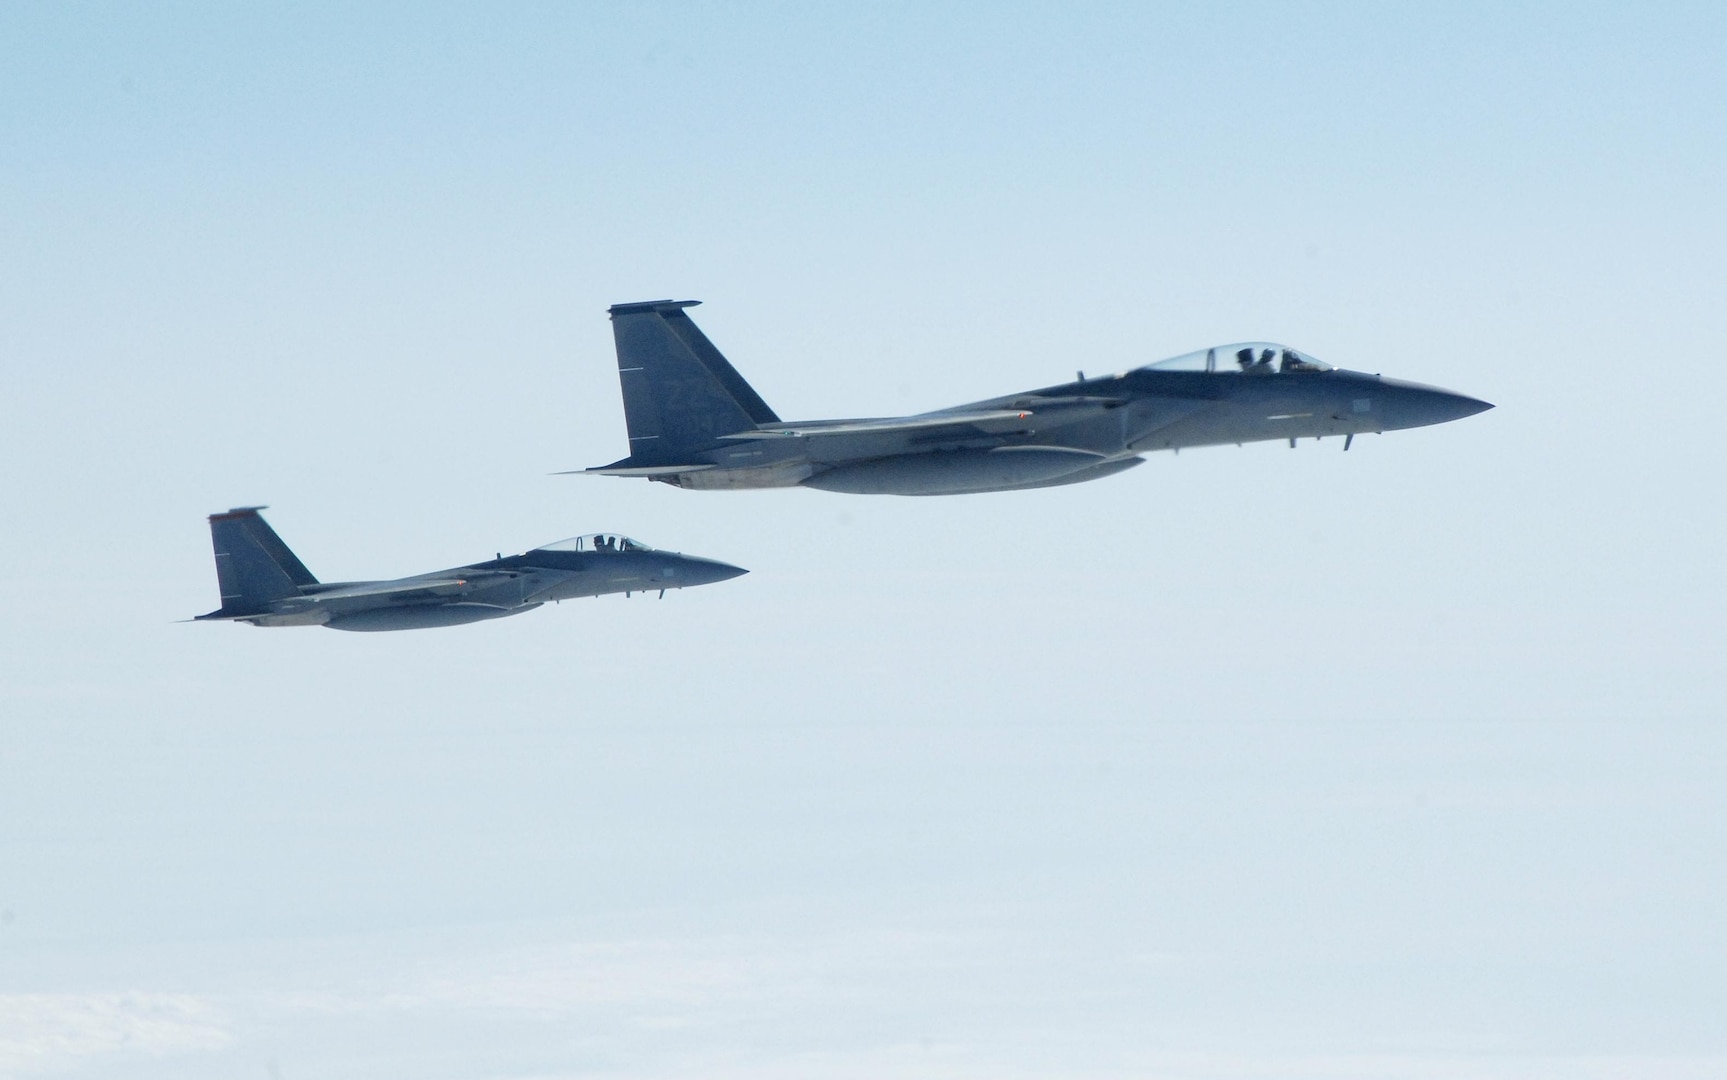 OVER THE PACIFIC OCEAN – A pair of U.S. F-15 fighters take up an escort position for a simulated hijacked airliner flying toward U.S. airspace during the second day of flying for Exercise Vigilant Eagle Aug. 9, 2011. The fighters took over the escort from a pair of Russian SU-27 fighters once the airliner, a Russian Federation Air Force jet, left Russian airspace and entered U.S. airspace. F-15 Eagles and SU-27 fighters escorted the aircraft while E-3 and A-50 airborne warning and control aircraft monitored them. (U.S. Air Force photo by Tech. Sgt. Thomas J. Doscher)
